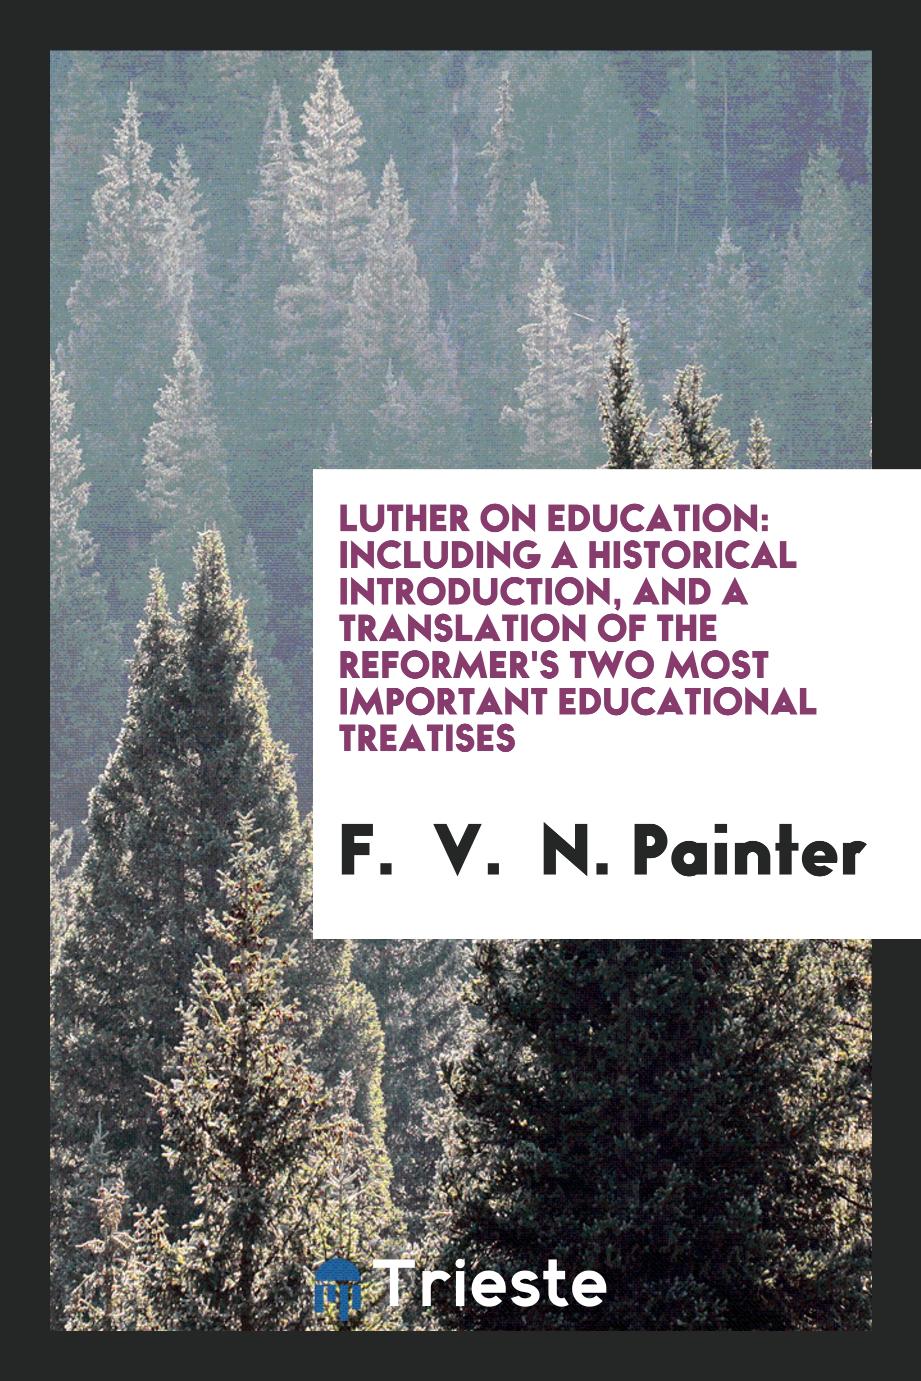 Luther on education: including a historical introduction, and a translation of the reformer's two most important educational treatises